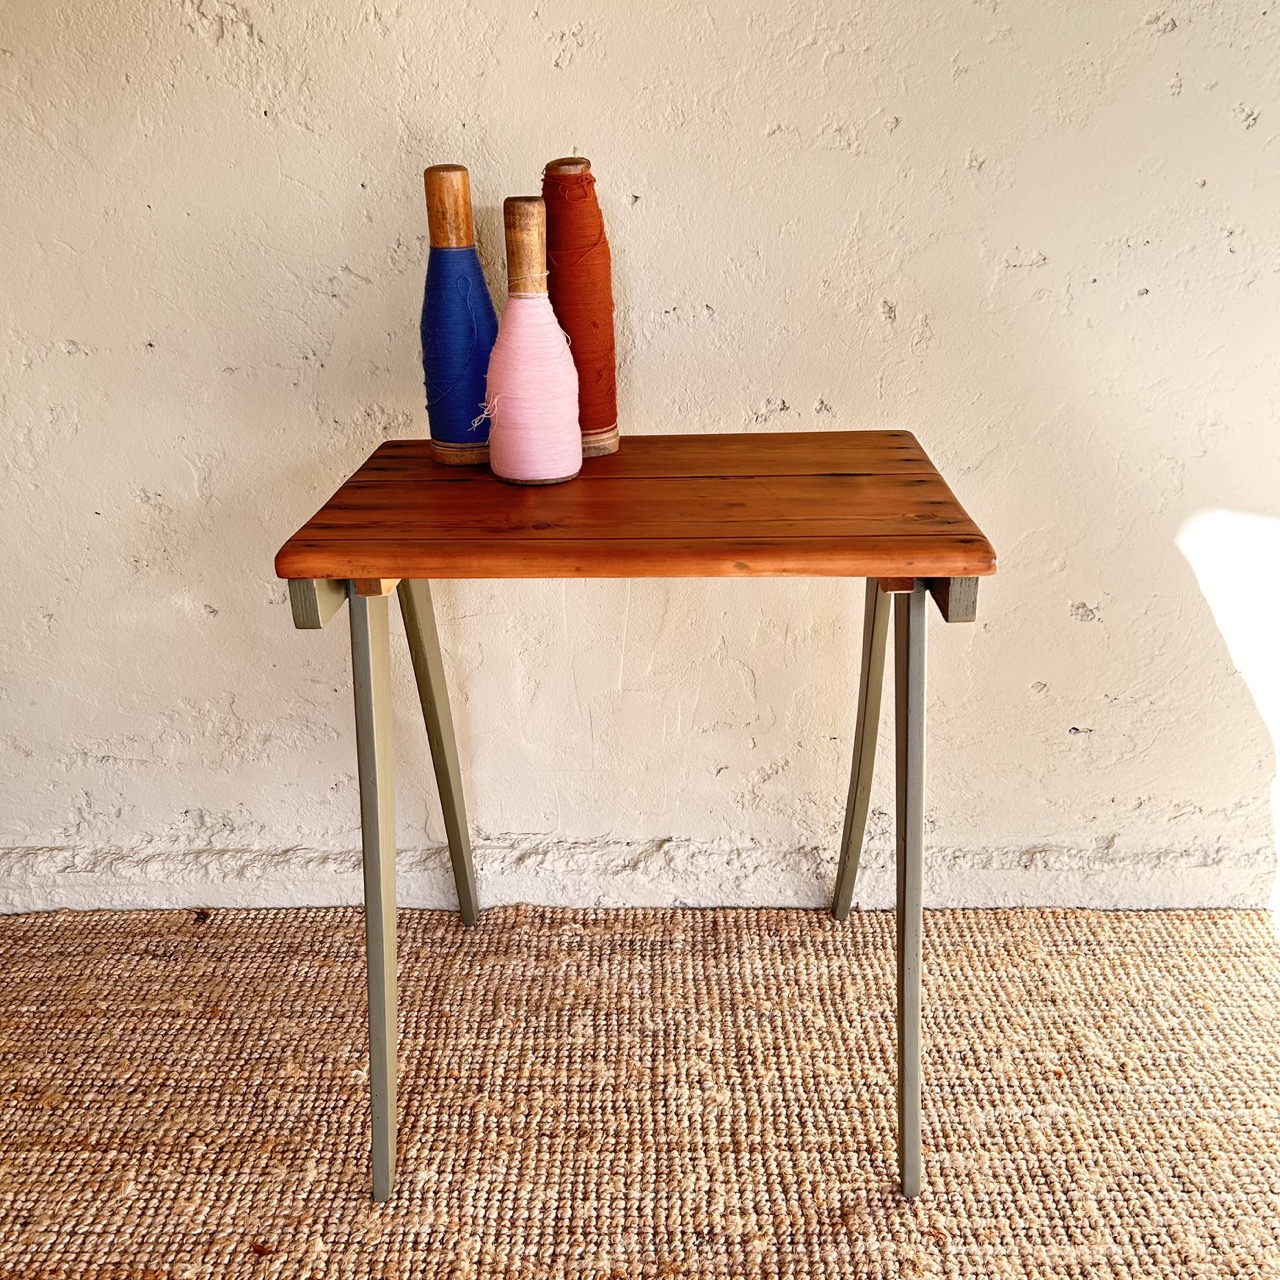 Petite table d'appoint #111